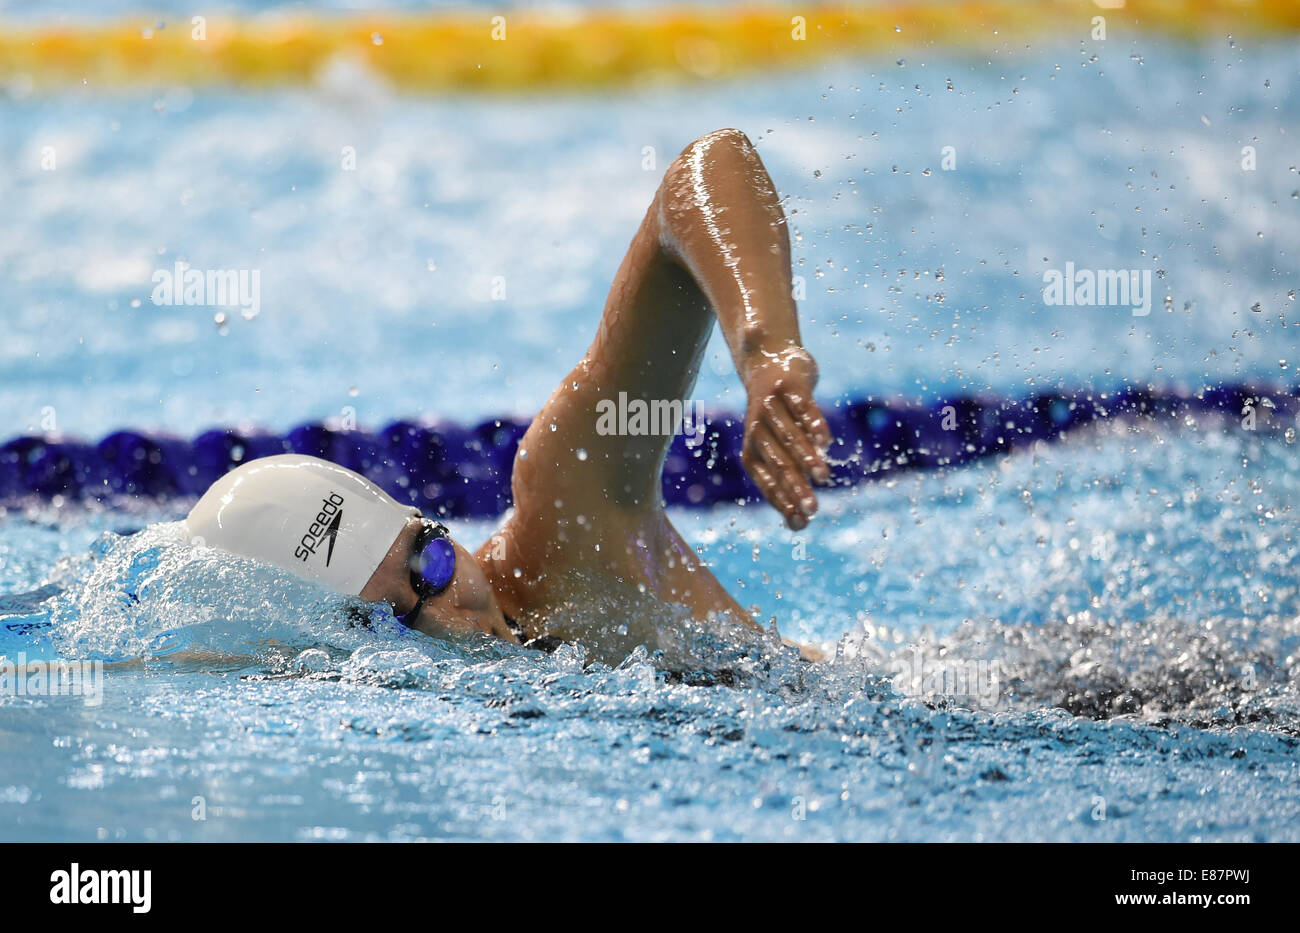 (141002) -- INCHEON, Oct. 2, 2014 (Xinhua) -- Wang Wei of China competes during the women's individual swimming match of modern pentathlon at the 17th Asian Games in Incheon, South Korea, Oct. 2, 2014. (Xinhua/Xie Haining)(mcg) Stock Photo